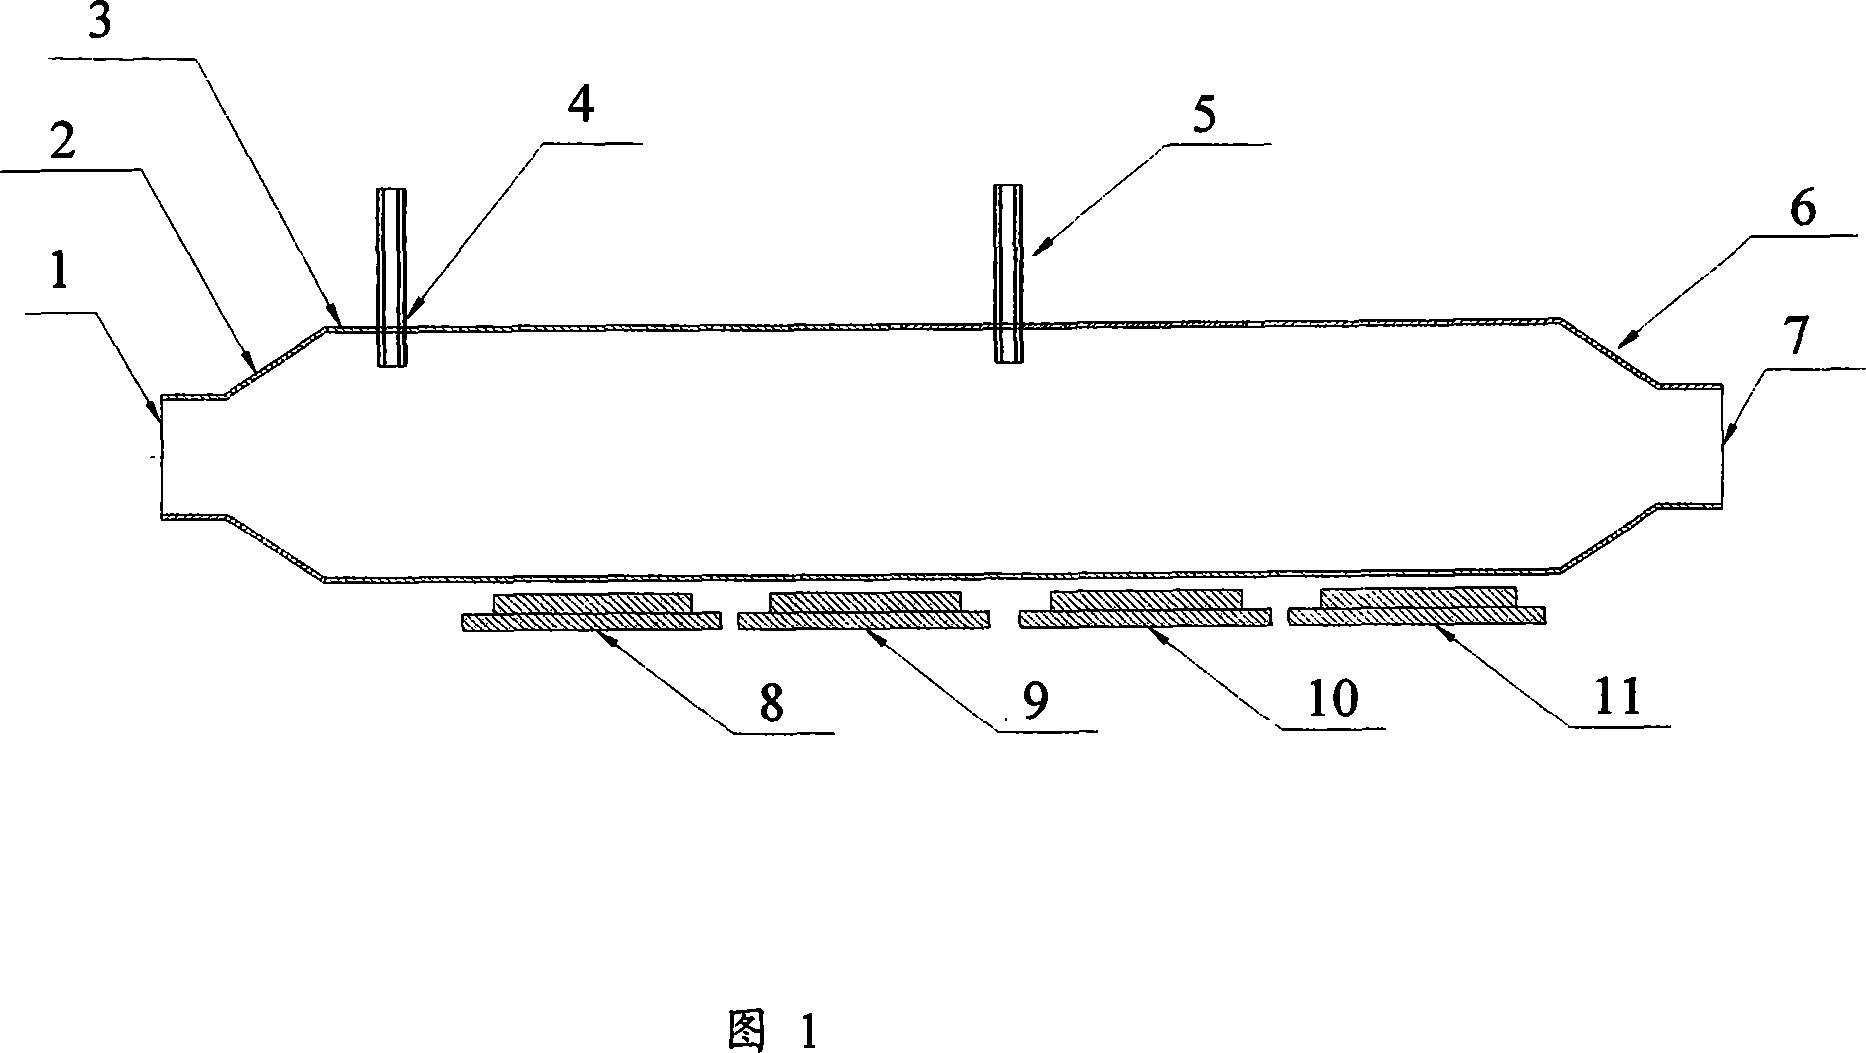 Coupling, wrapping agglomeration device for ultra fine particles in sound field of gaseous and solid jet flow